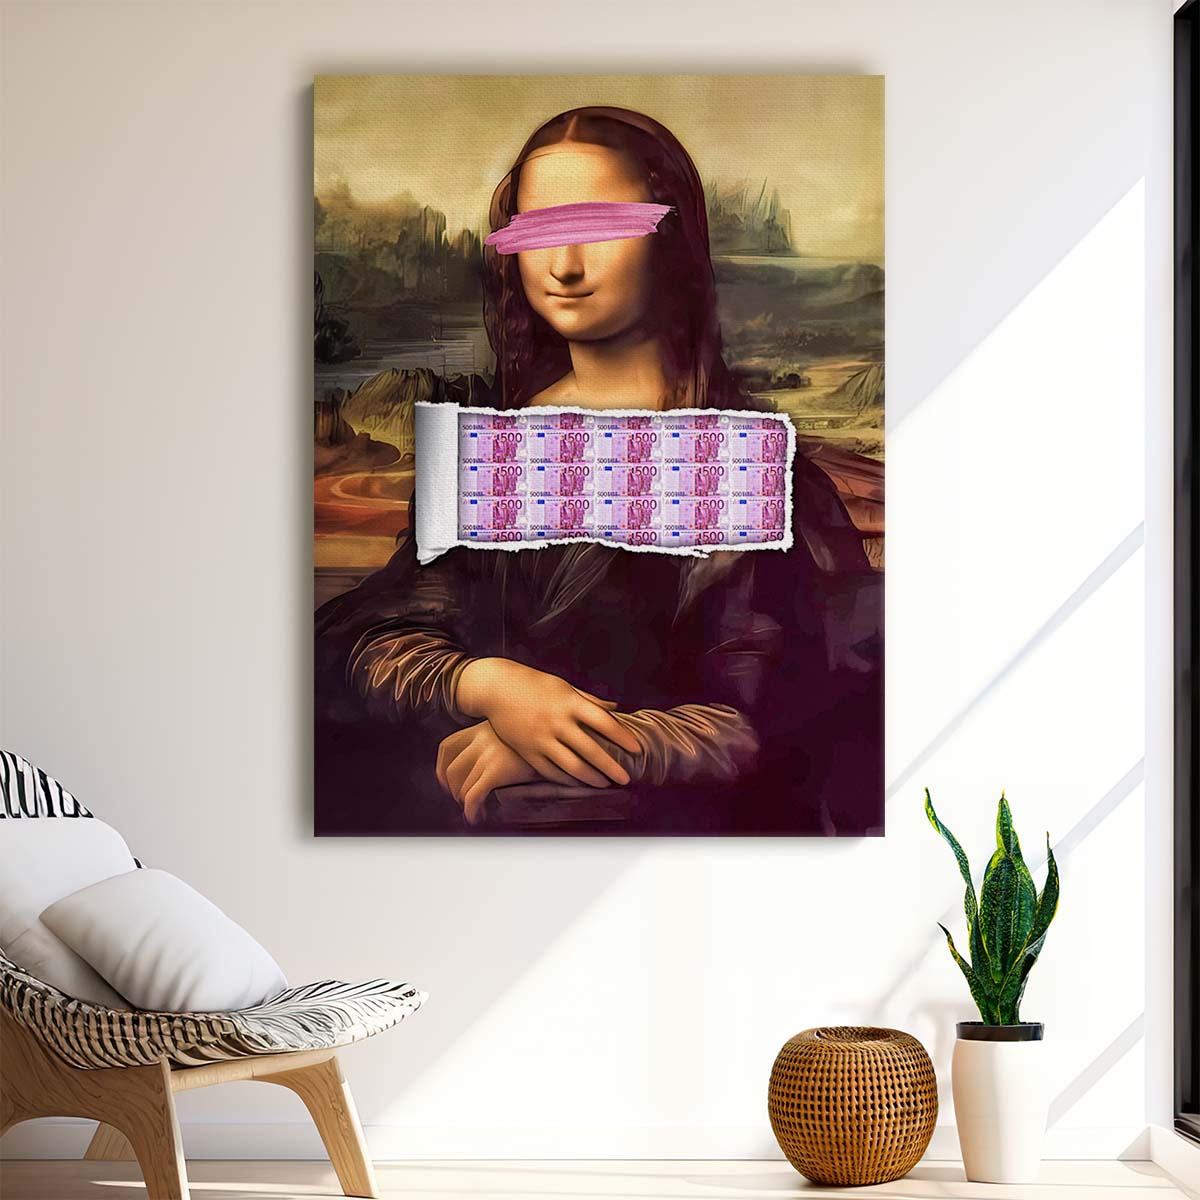 Money Lisa 500 Wall Art by Luxuriance Designs. Made in USA.